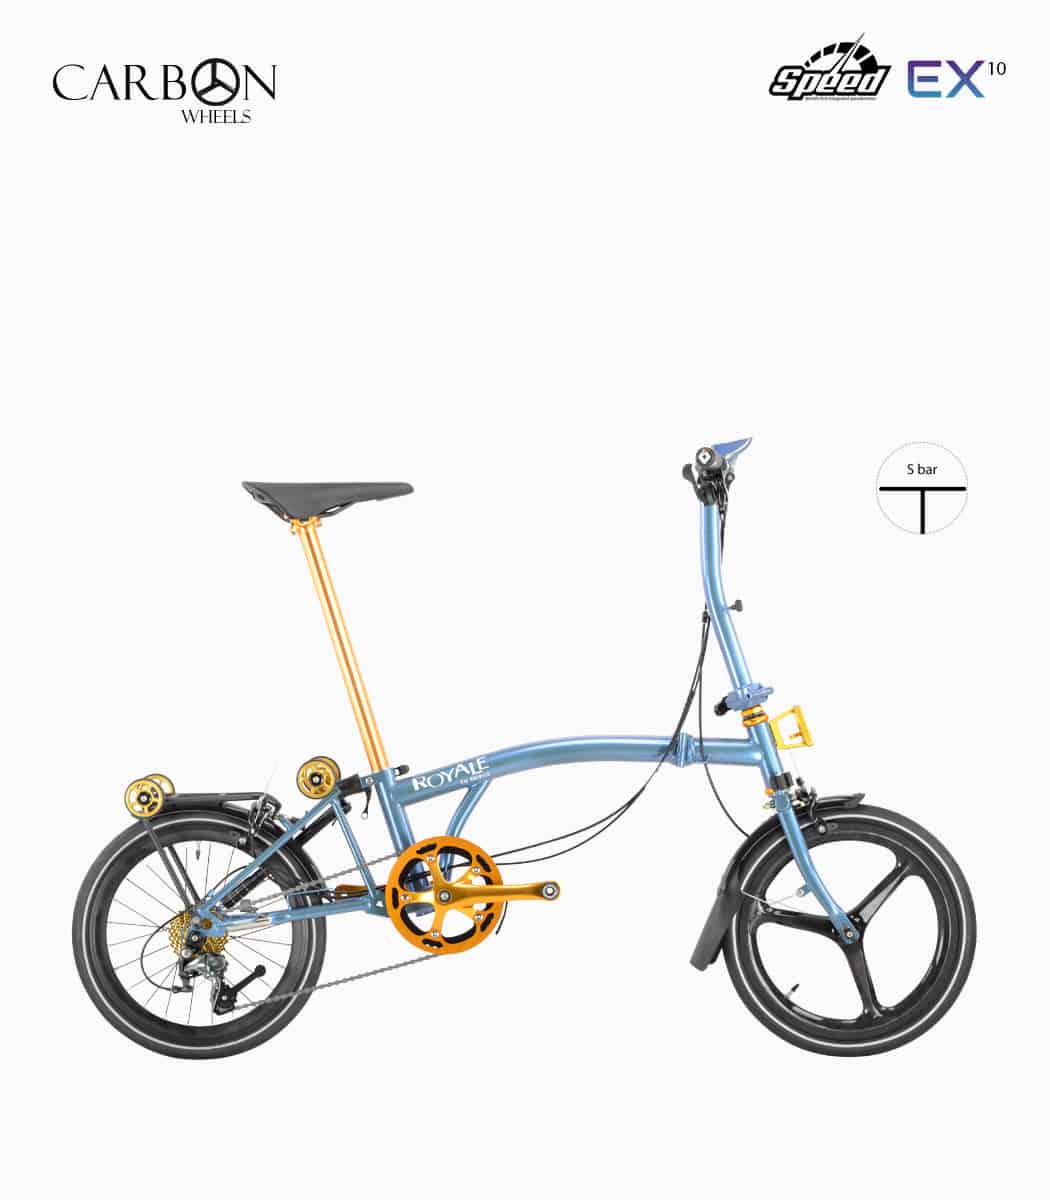 MOBOT ROYALE CARBON EX S10 (STORM BLUE) foldable bicycle speedometer edition with reflective tyres right